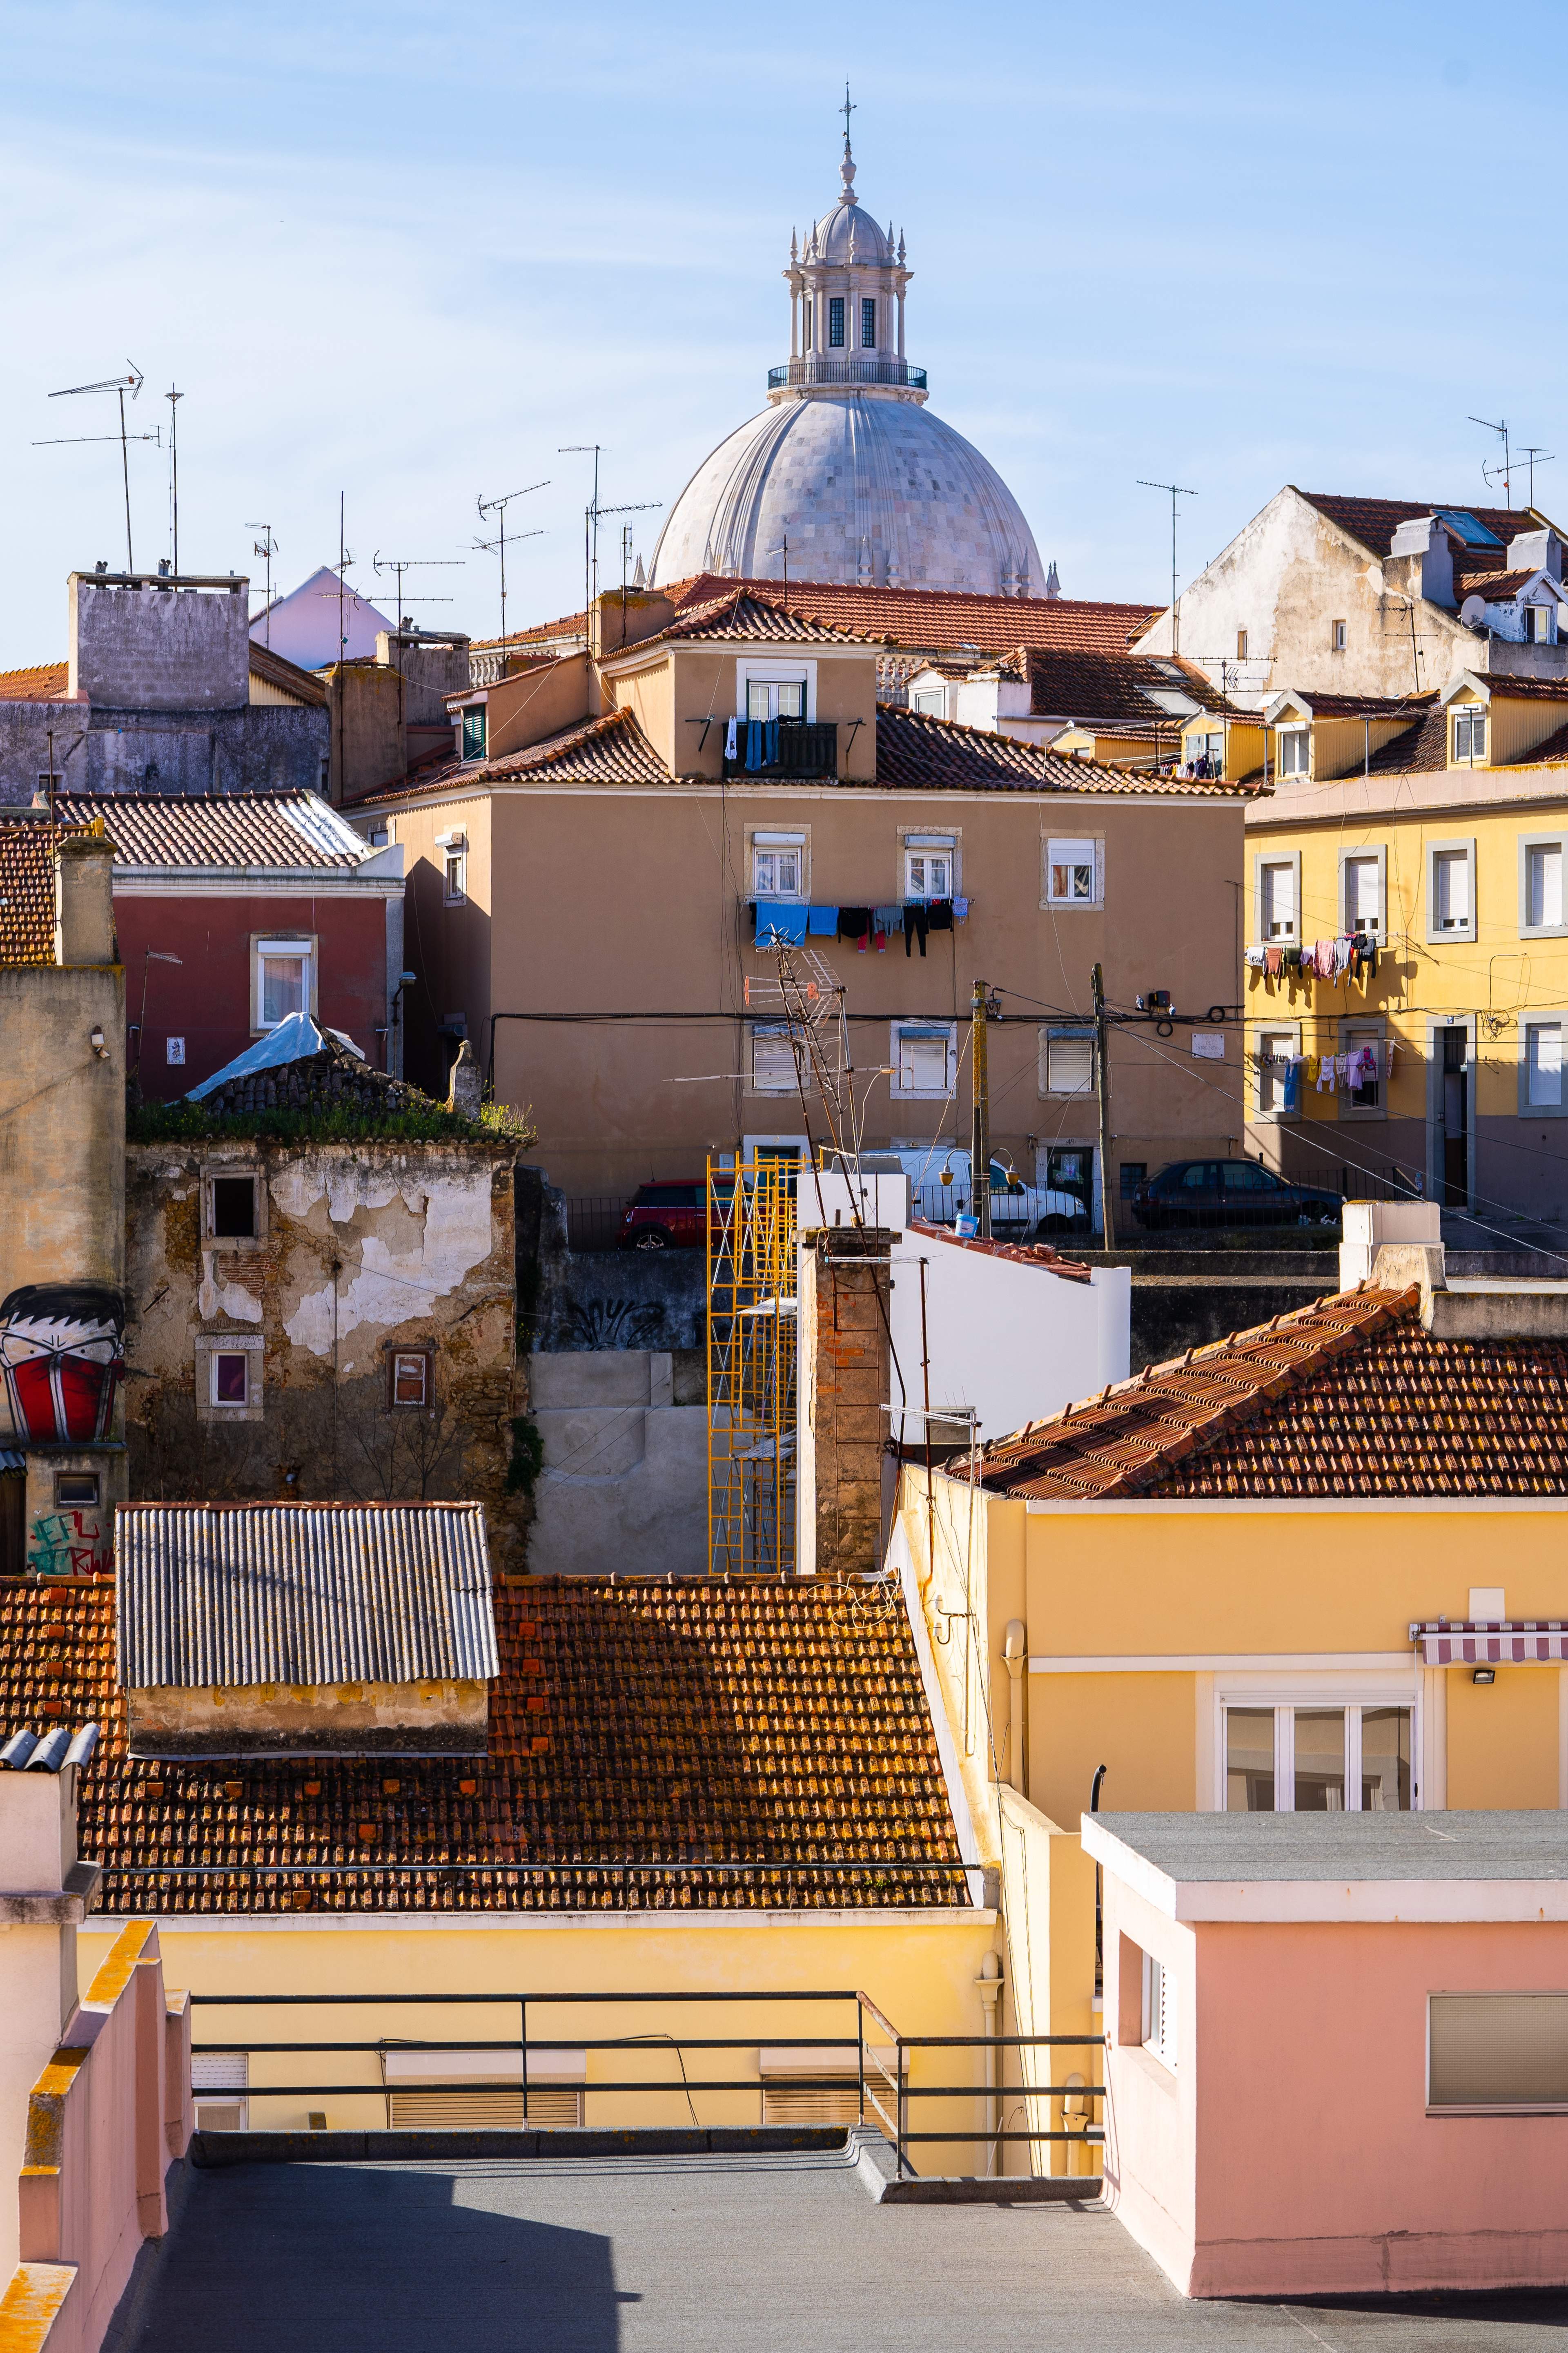 A view from our apartment - A dome of National Pantheon can be seen above the roofs.